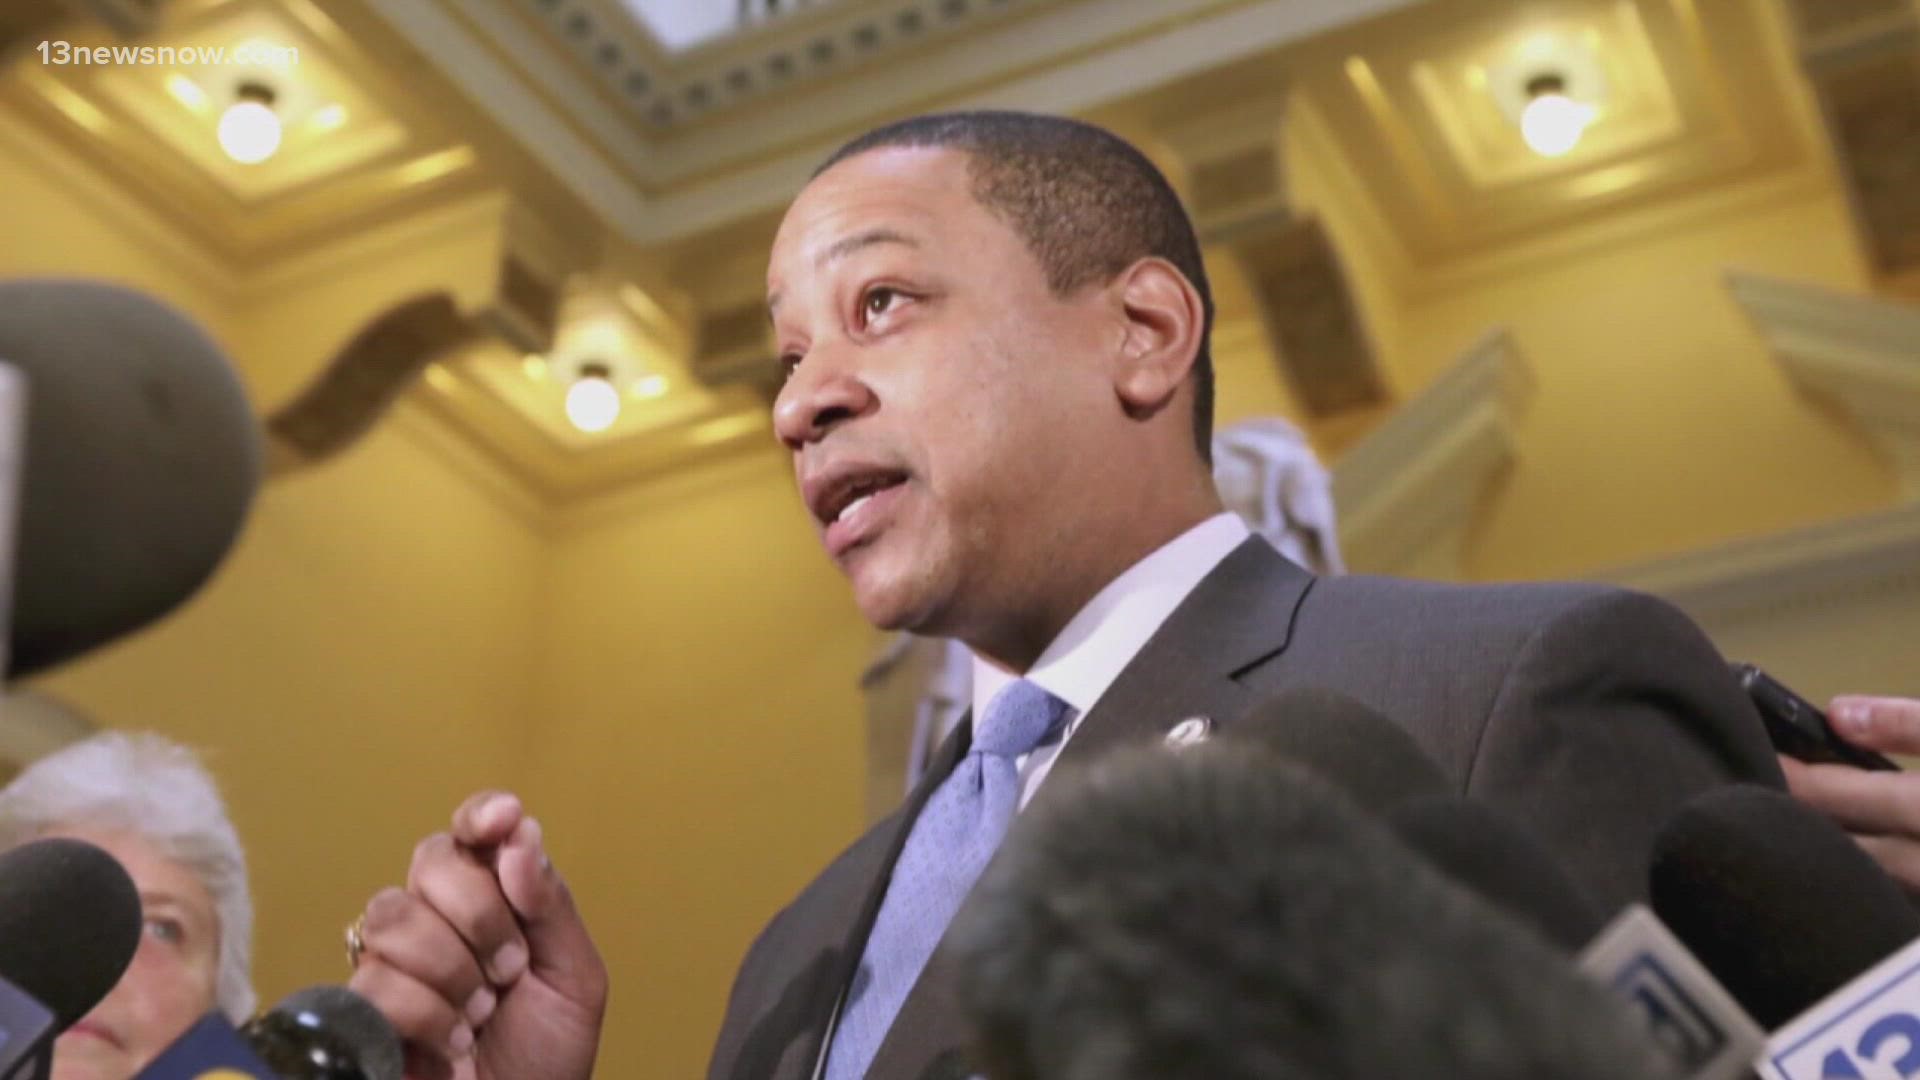 Former Lieutenant Governor Justin Fairfax says he's been interviewed by the FBI about the origins of two sexual assault allegations against him.